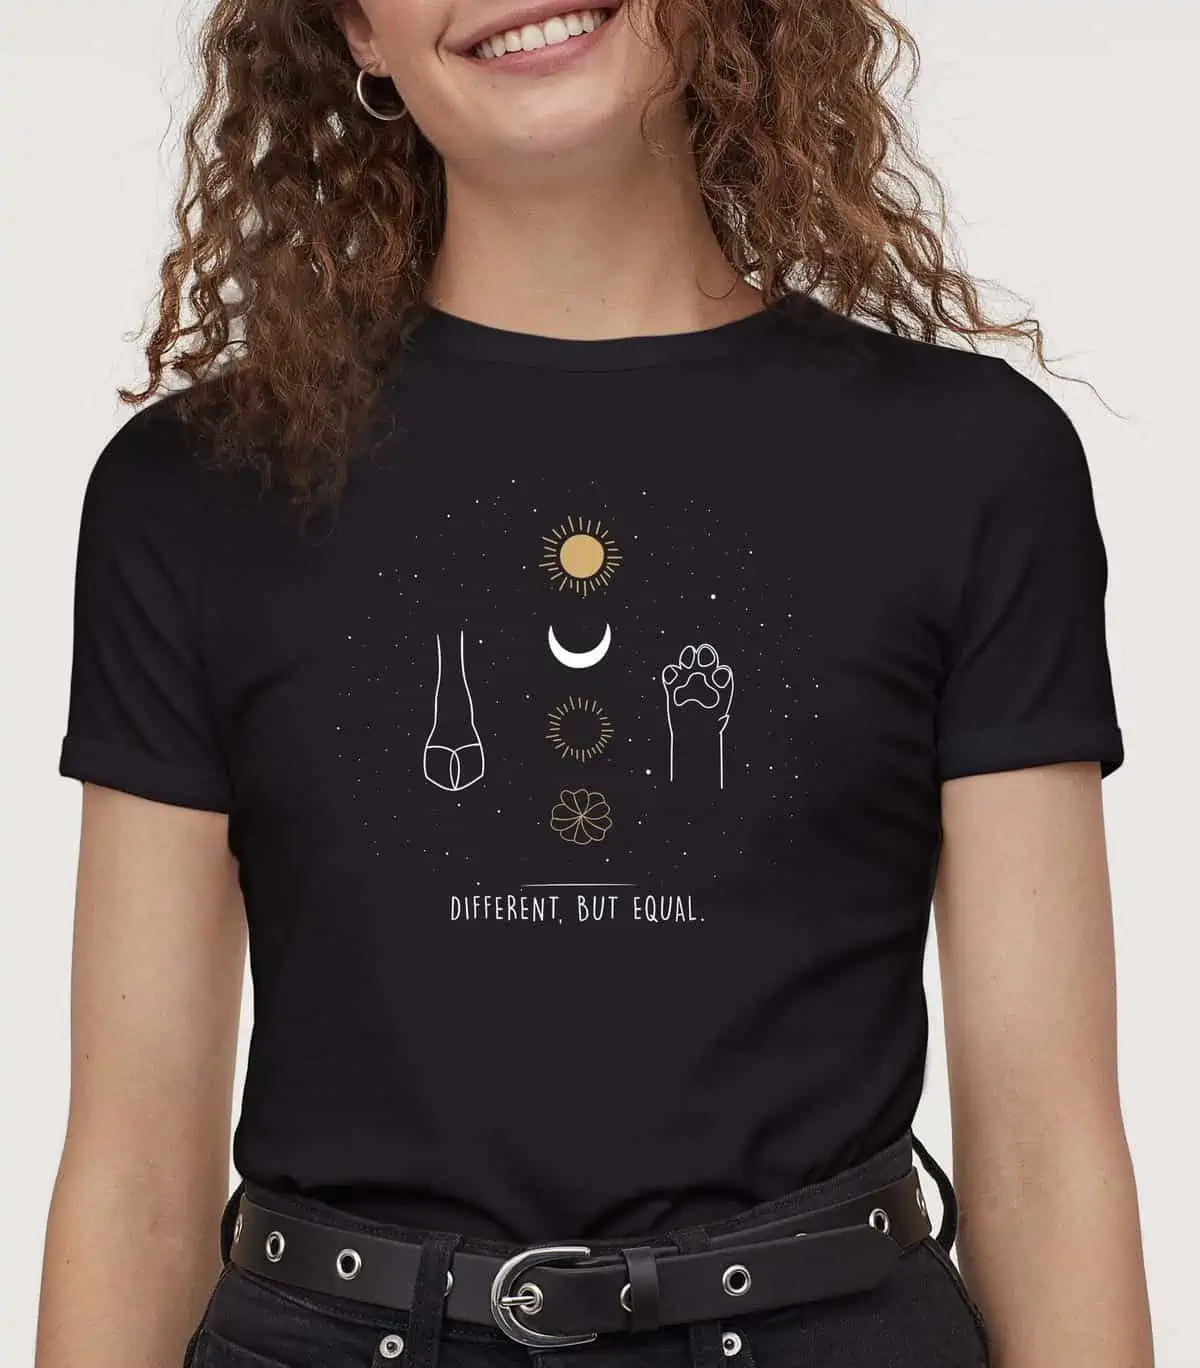 black vegan t-shirt with a mmystical design that says different but equal